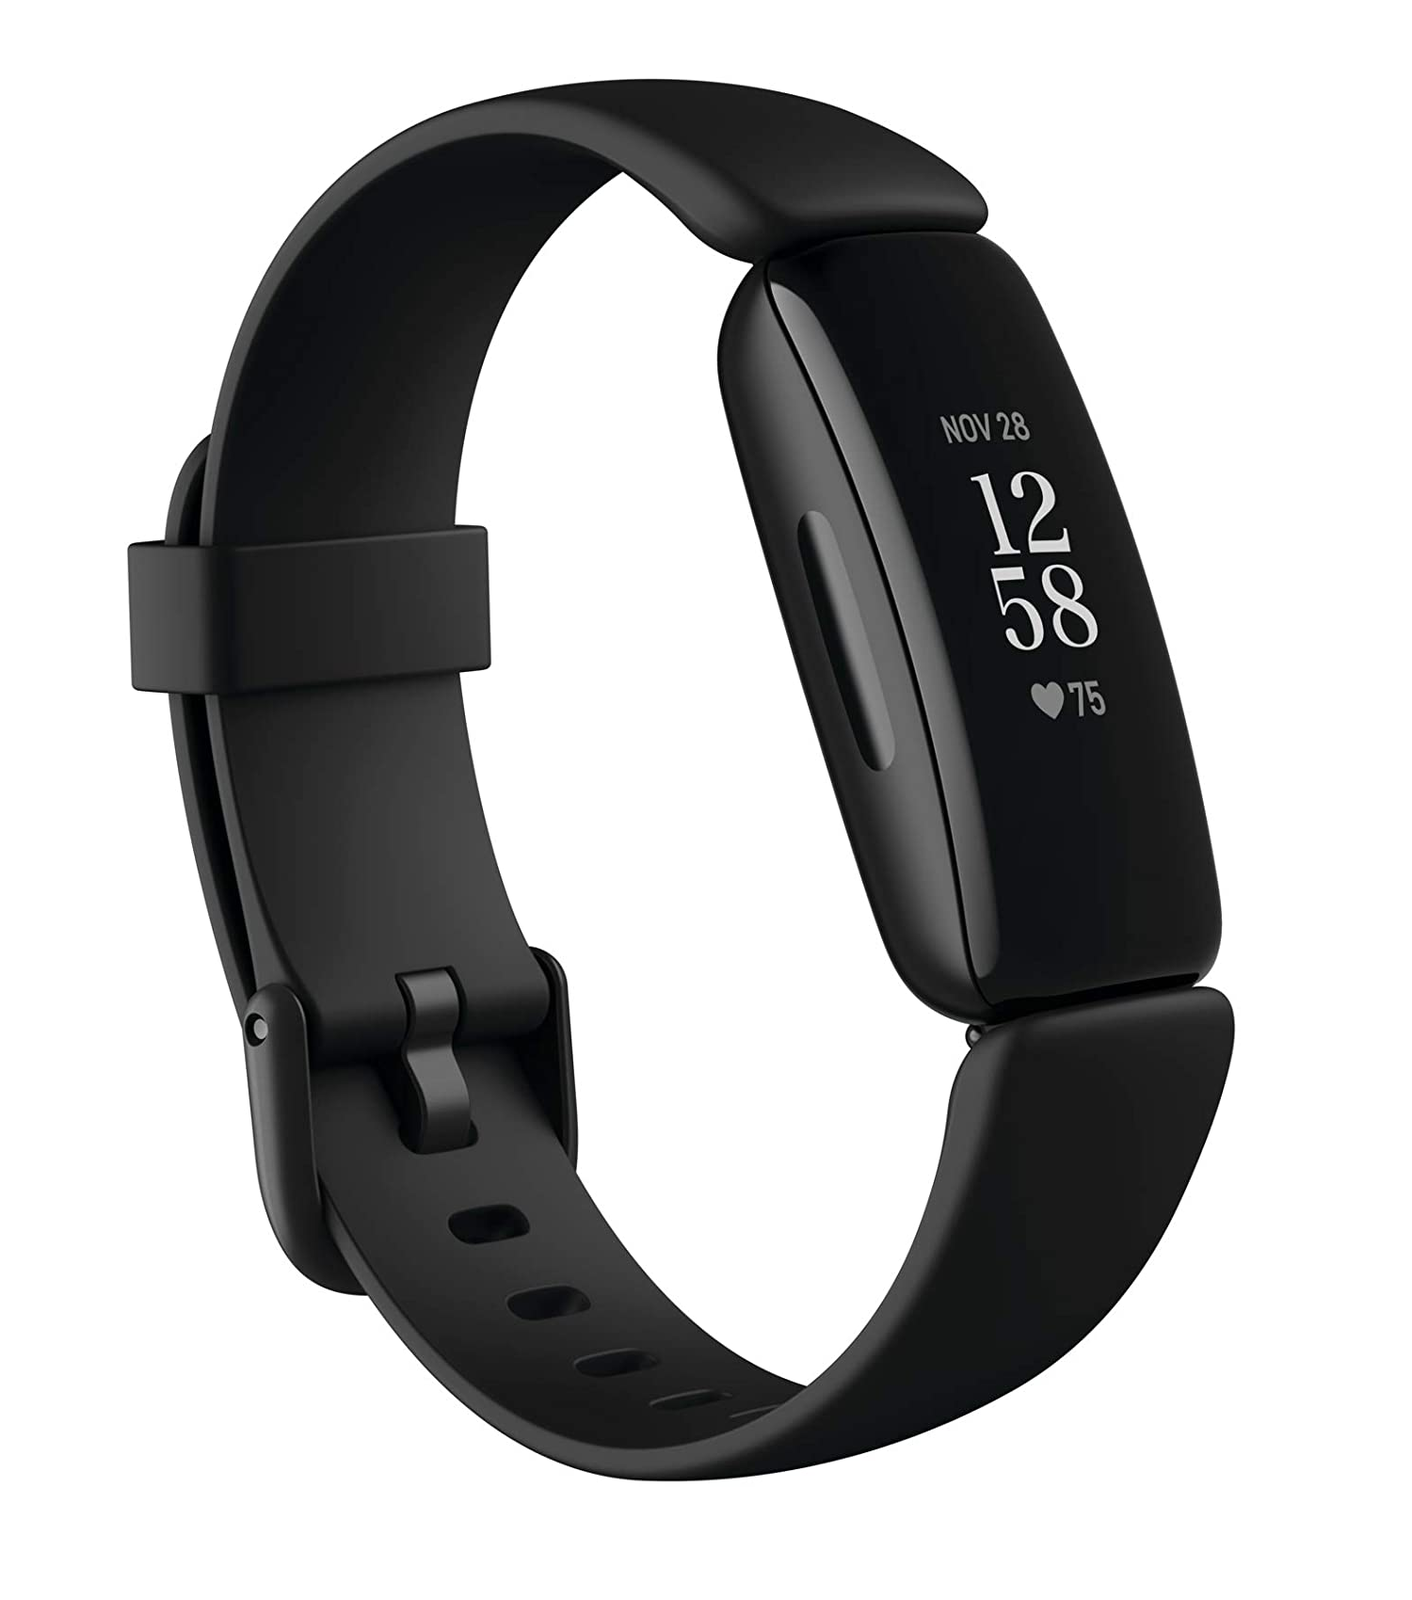 The Fitbit Charge 4 and Fitbit Inspire 2 receive new features in their